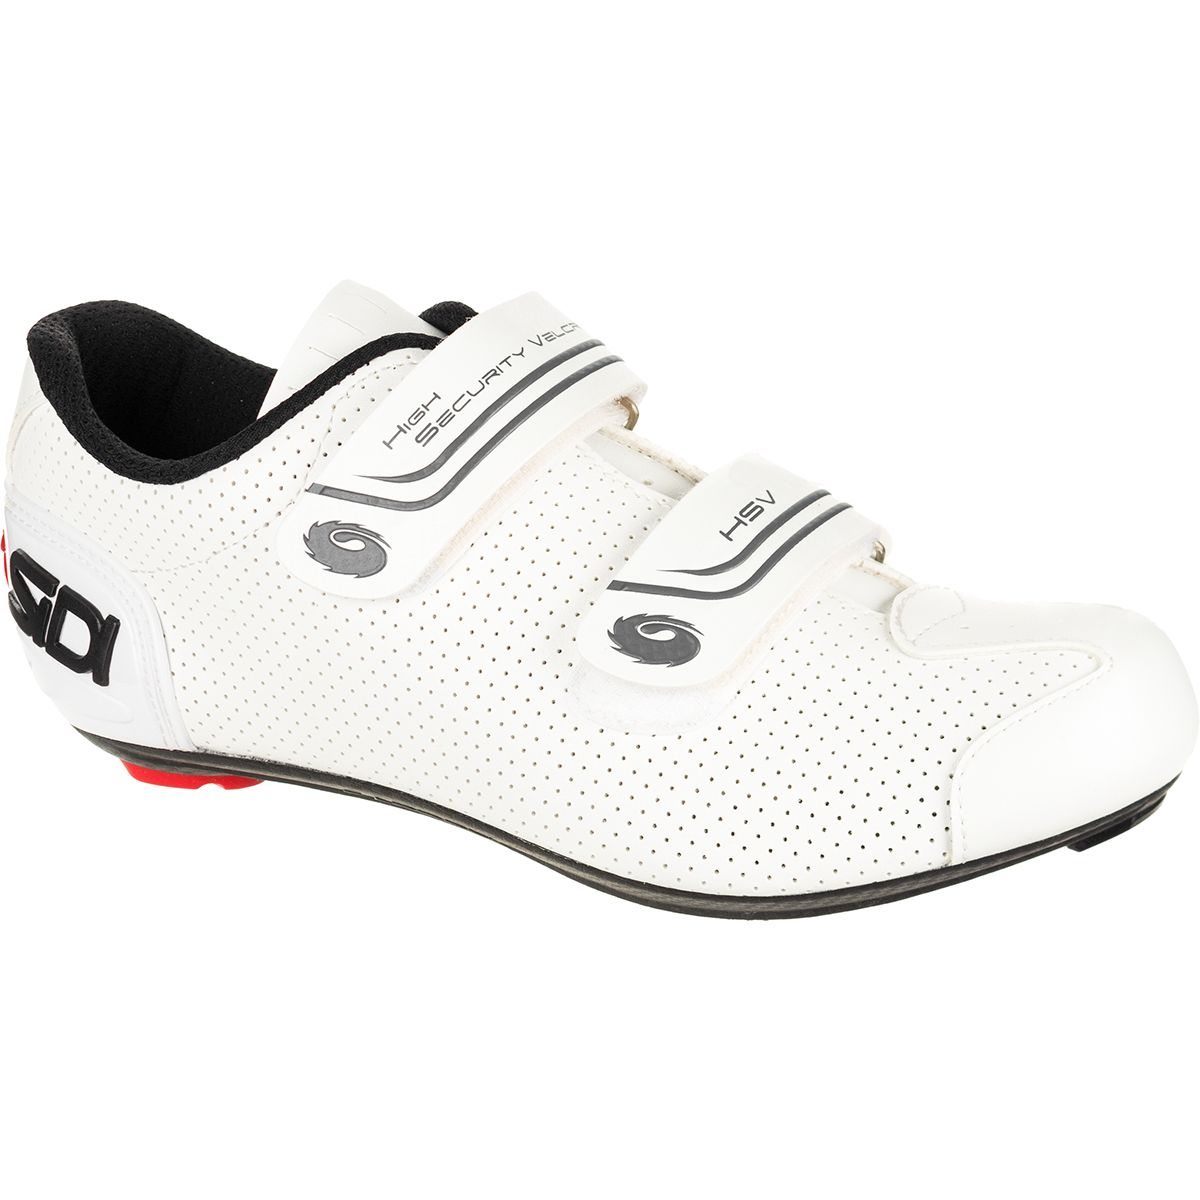 Sidi 2019 Men's STUDIO AIR Indoor Spin Cycling Shoes BRAND NEW IN BOX 